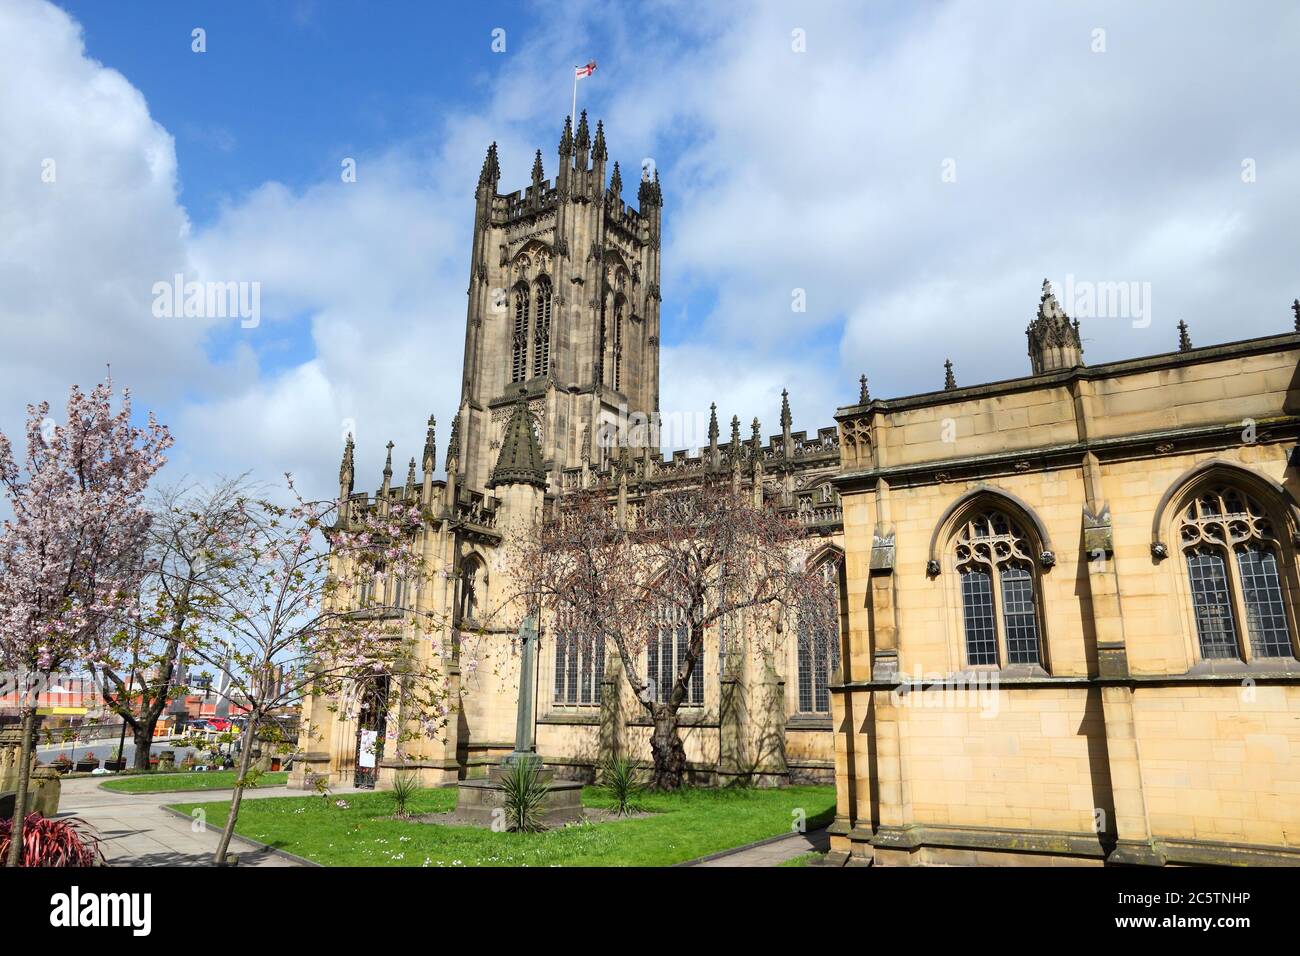 Manchester, UK - Anglican Cathedral. Spring time cherry blossom. City in North West England. Grade I listed building. Stock Photo